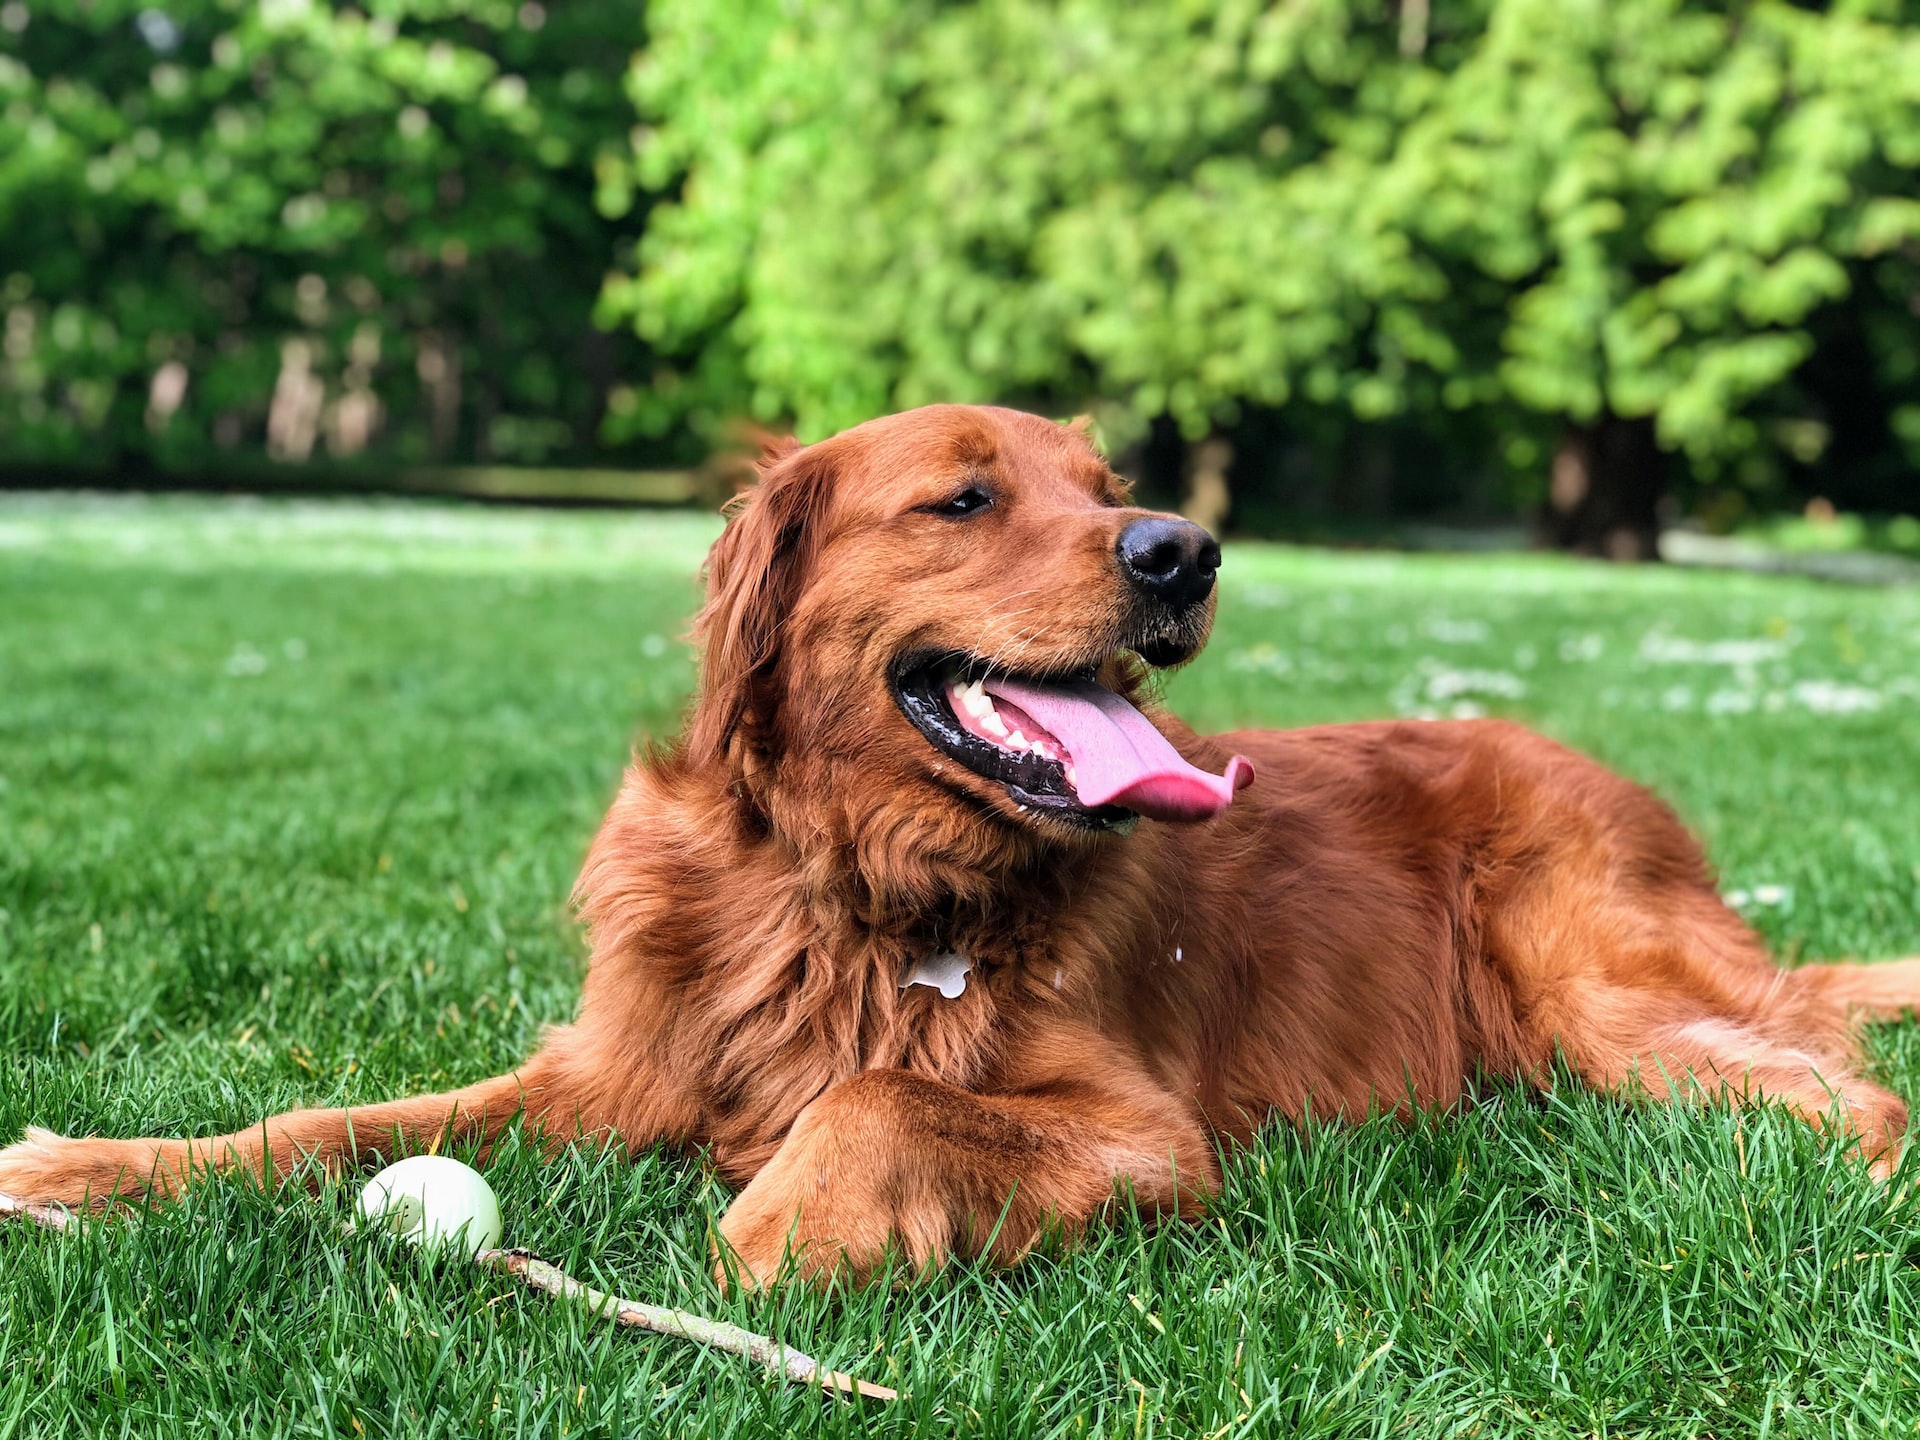 Golden retriever panting and resting in the grass.